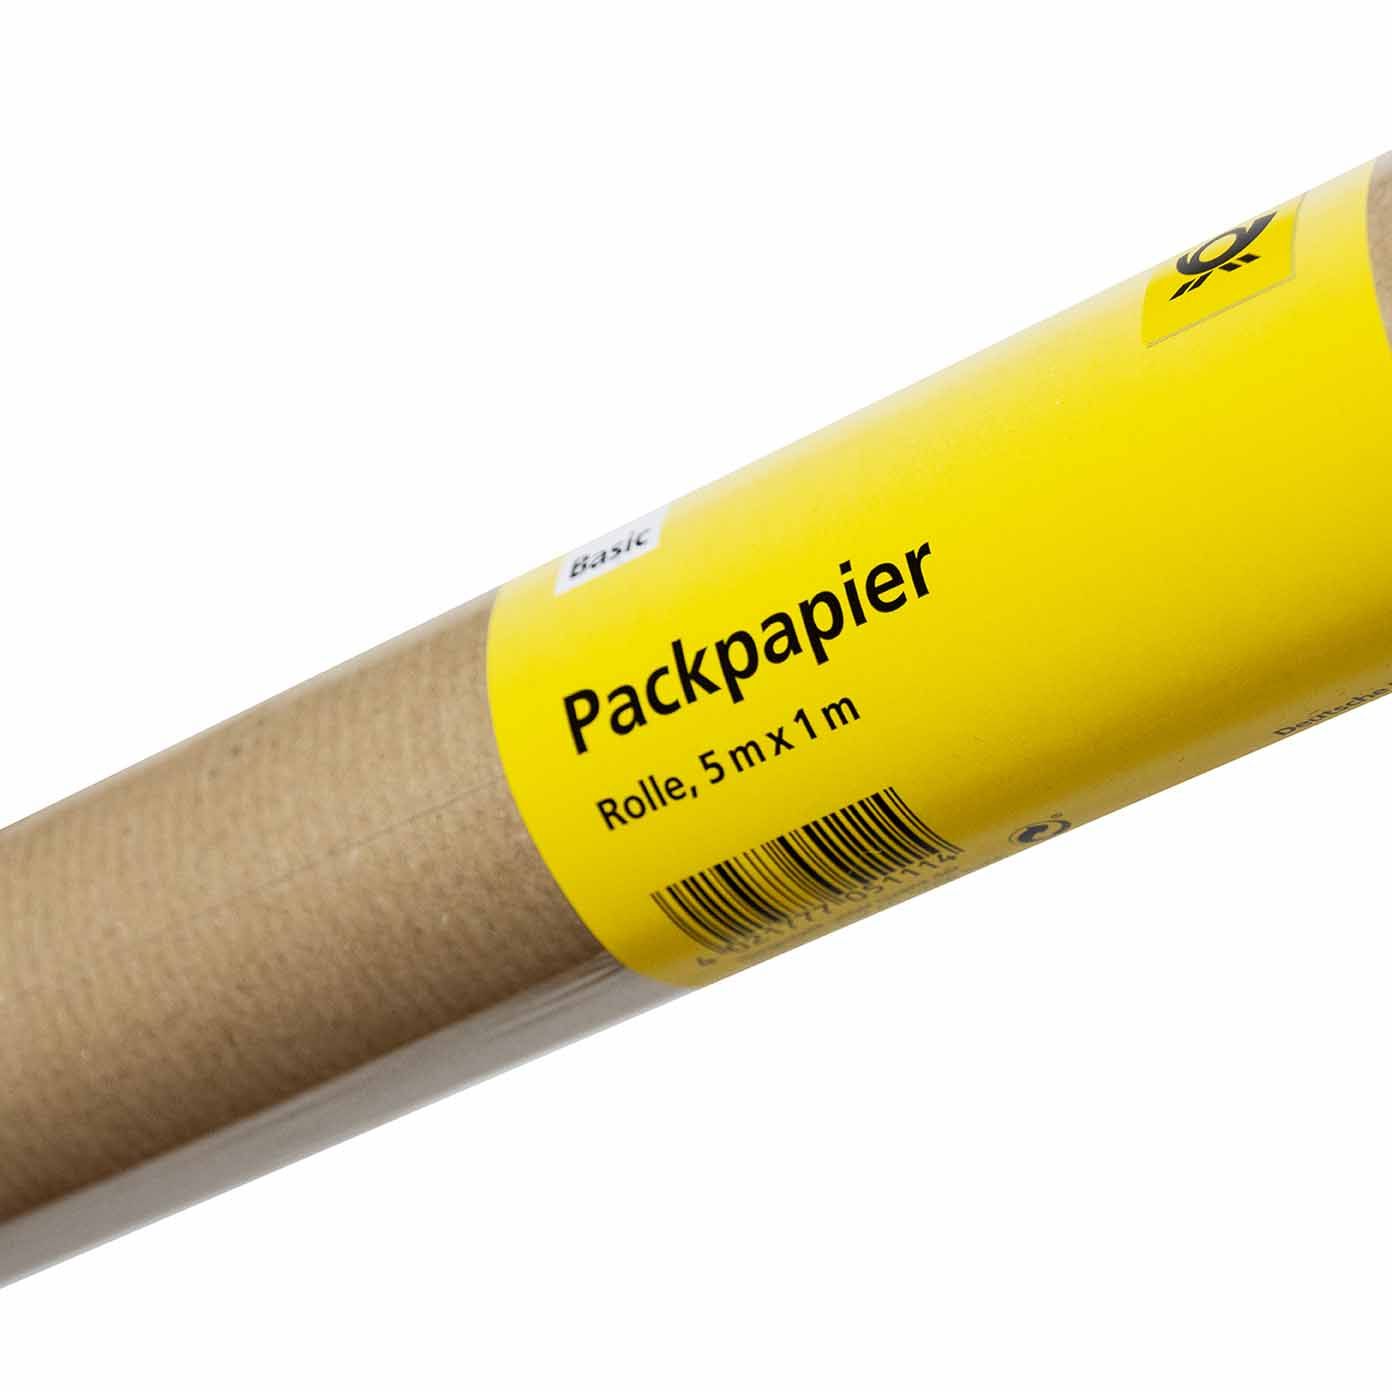 Packpapier Rolle 5m x 1m